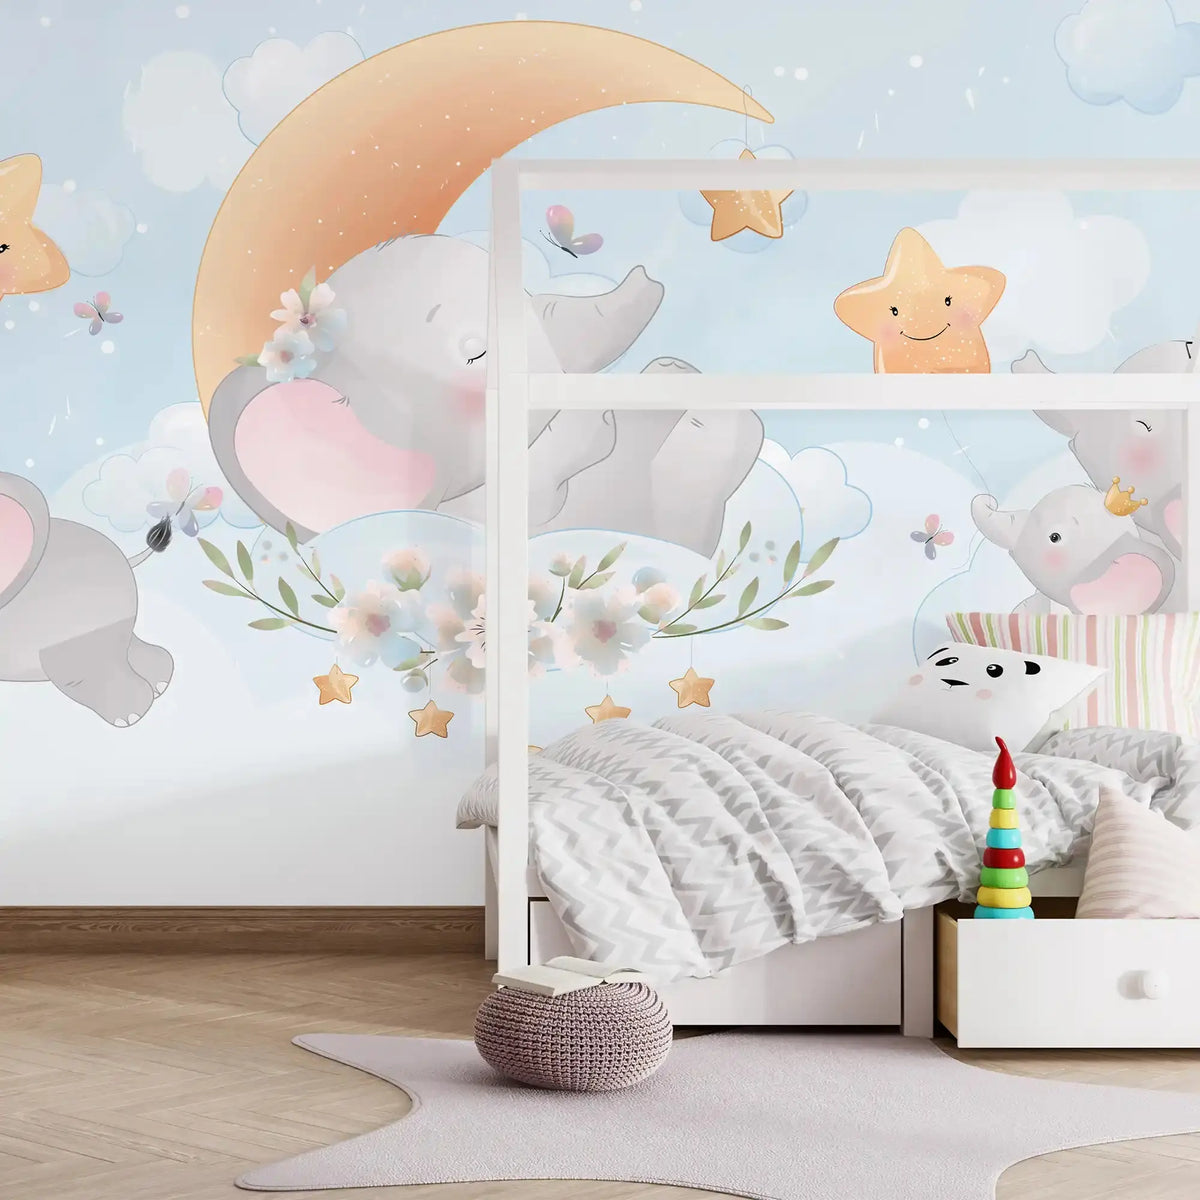 6009 / Self Adhesive, Removable Nursery Wallpaper with Elephant & Floral Design for Child Room - Artevella